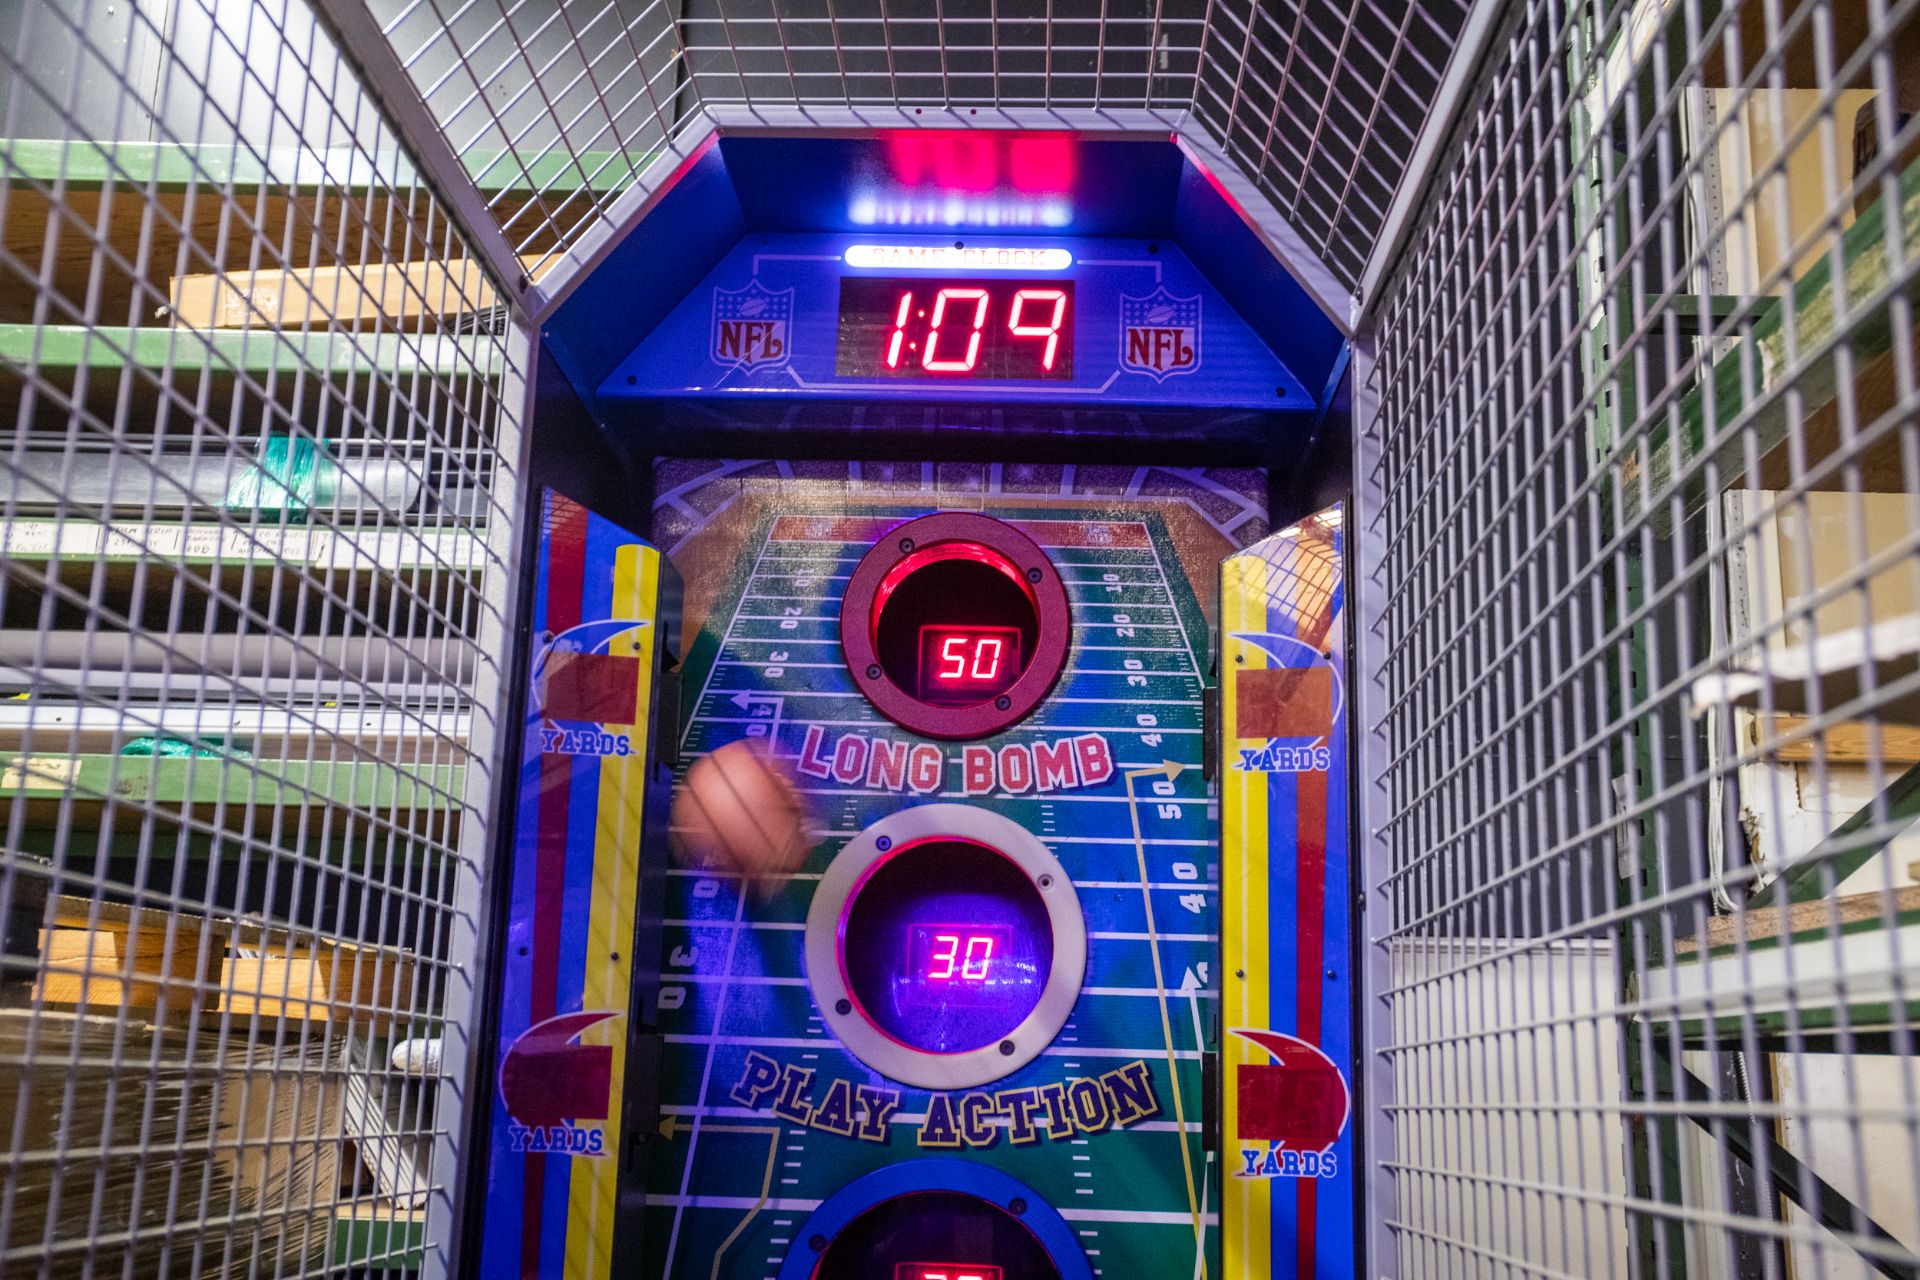 Two Minute Drill - Football Toss Arcade Game - Image 5 of 5